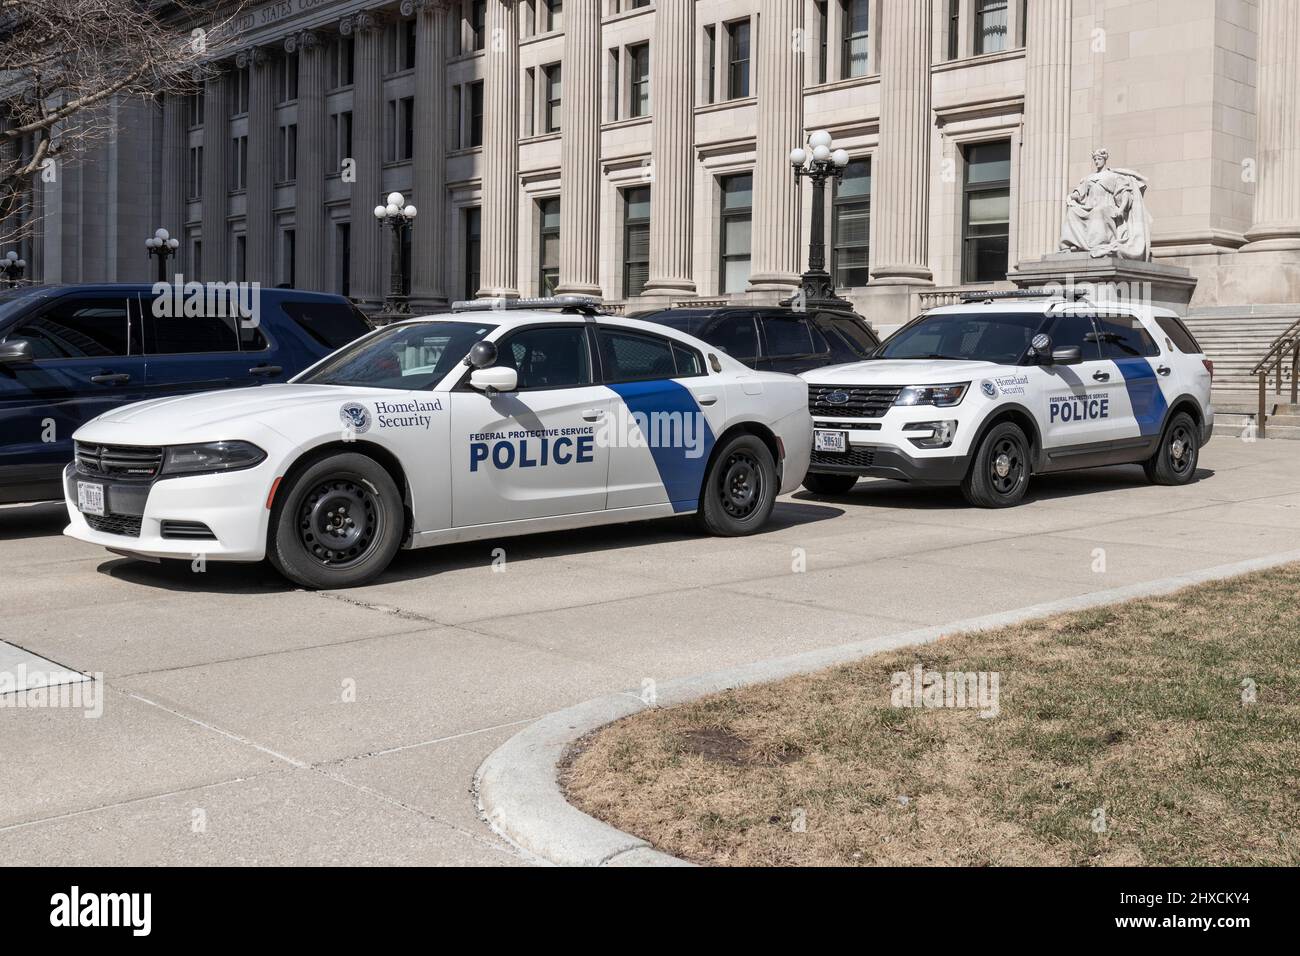 Indianapolis - Circa March 2022: Federal Protective Service Police vehicles. The Federal Protective Service provides security for federally owned buil Stock Photo